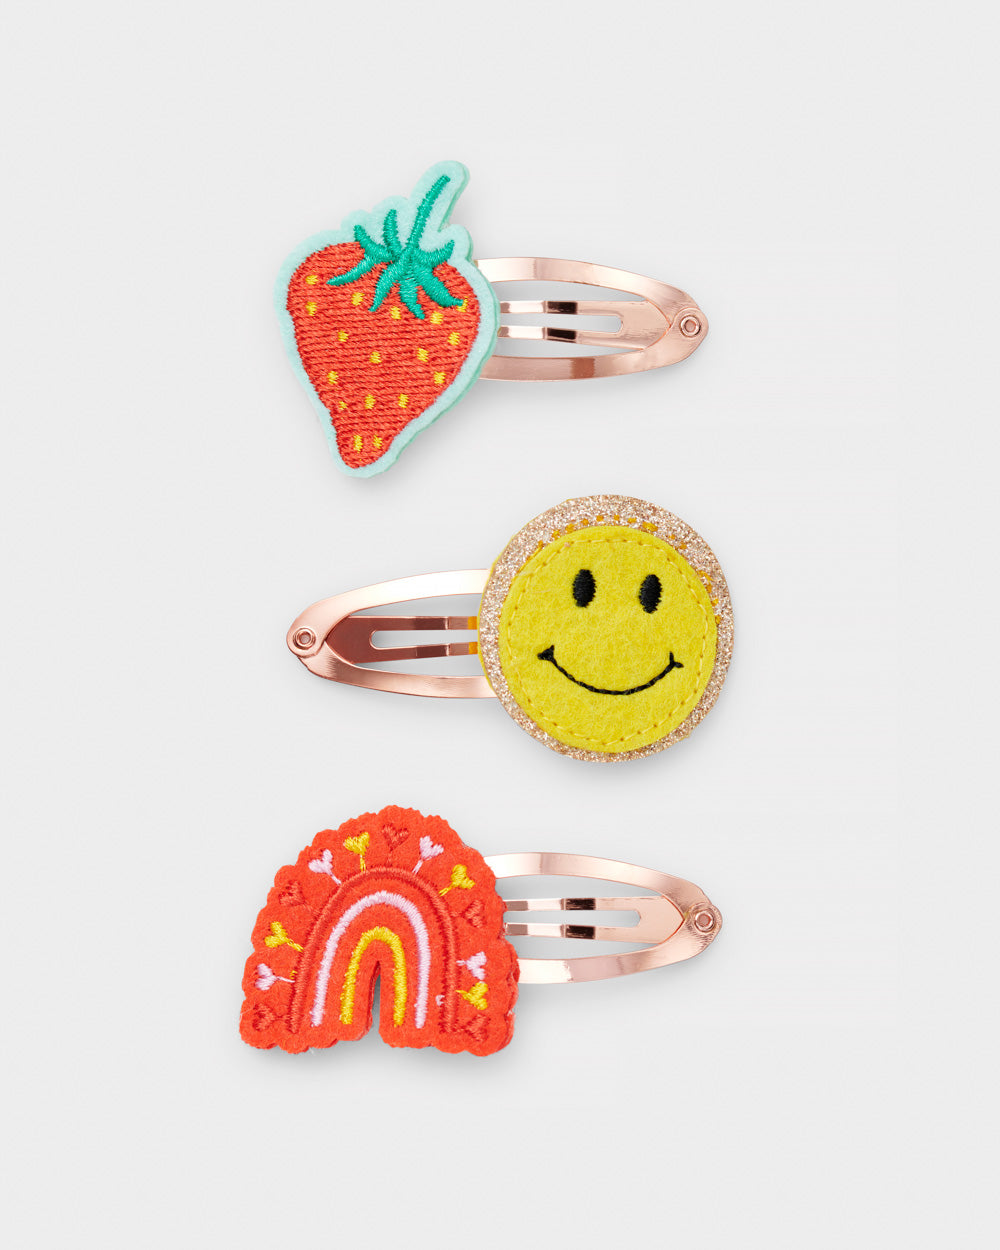 STYCH Fruit Salad Embroidered Hair Clips